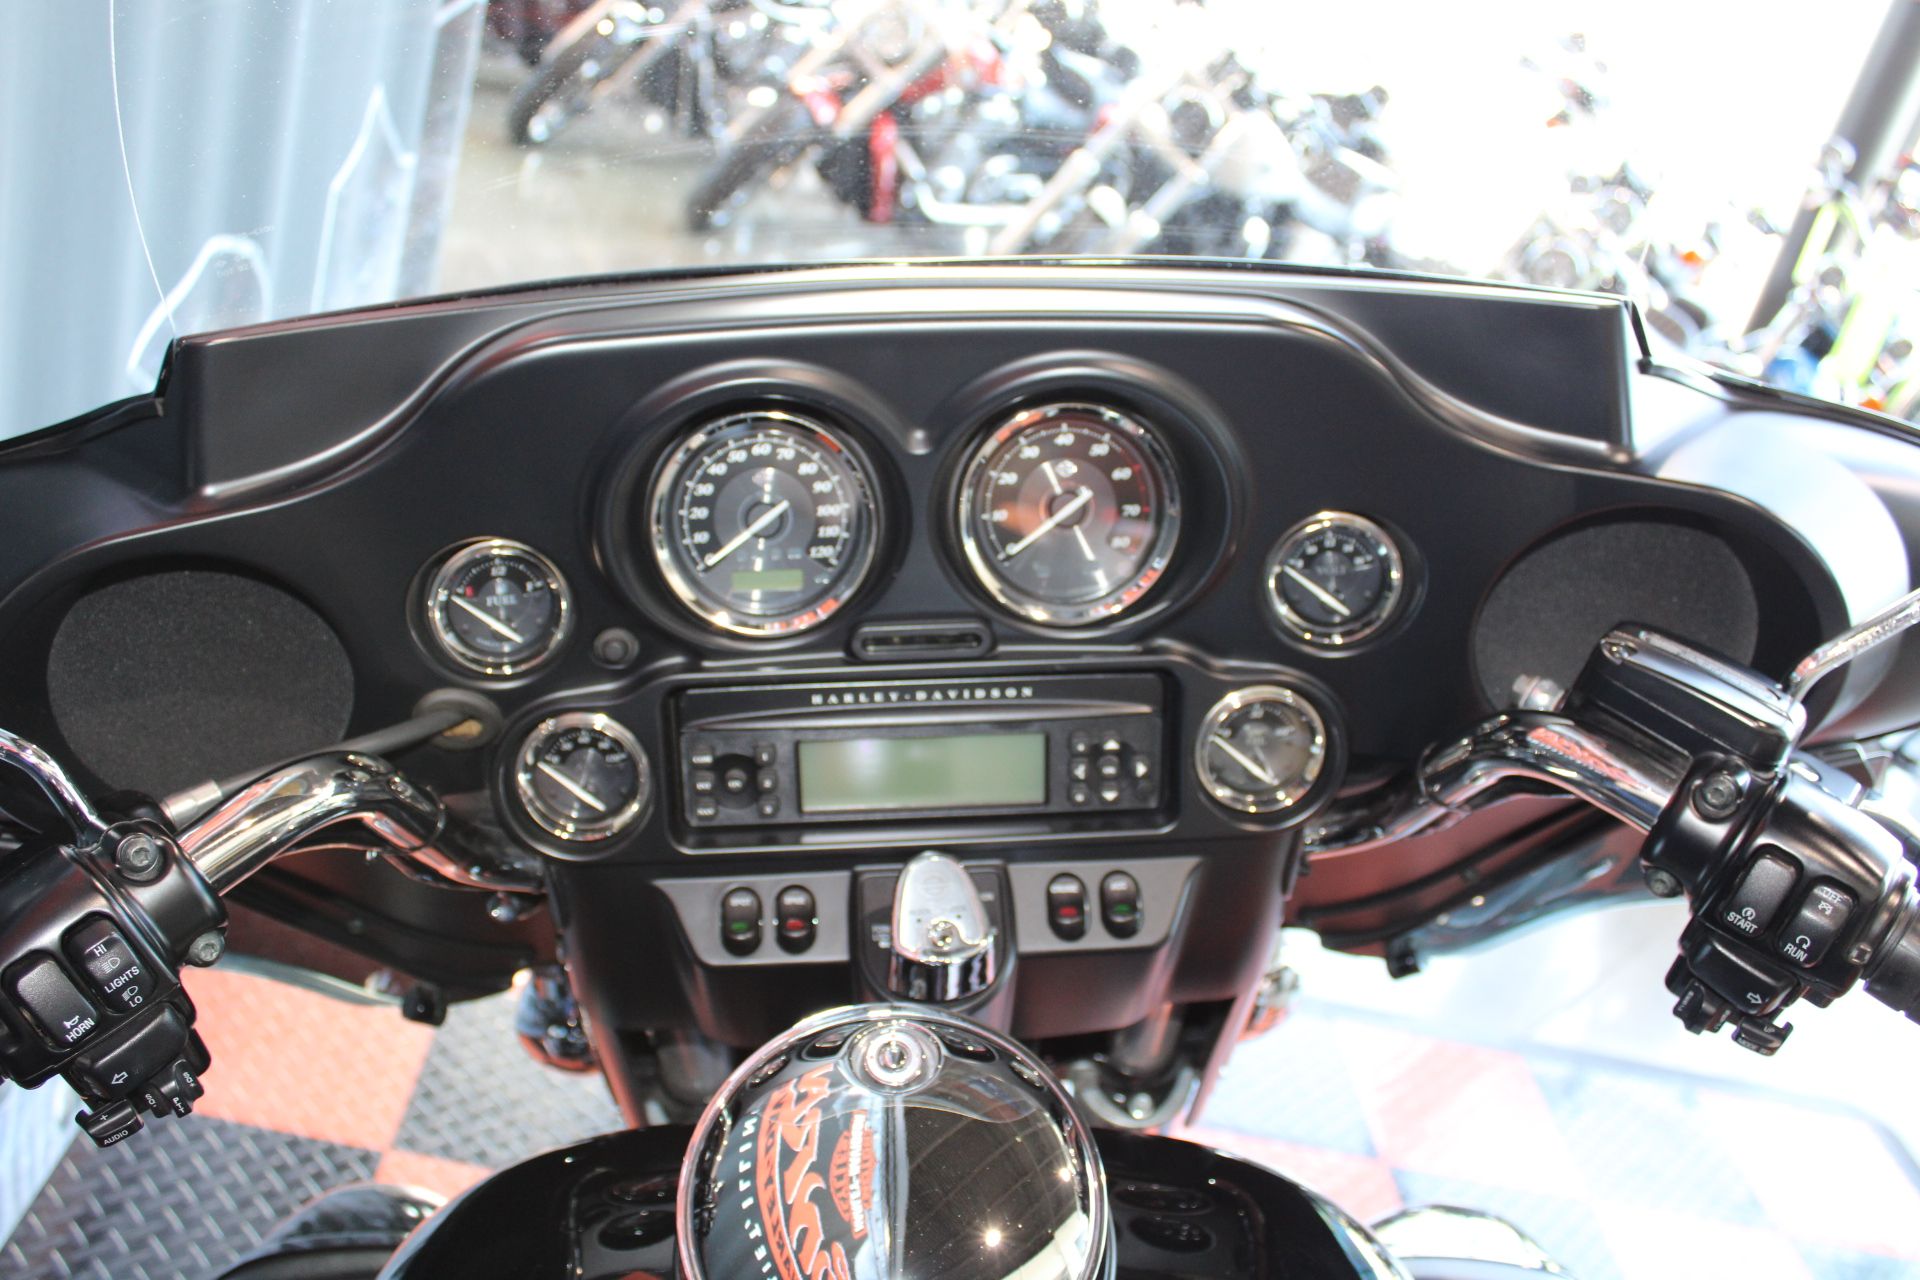 2013 Harley-Davidson Electra Glide® Ultra Limited in Shorewood, Illinois - Photo 14